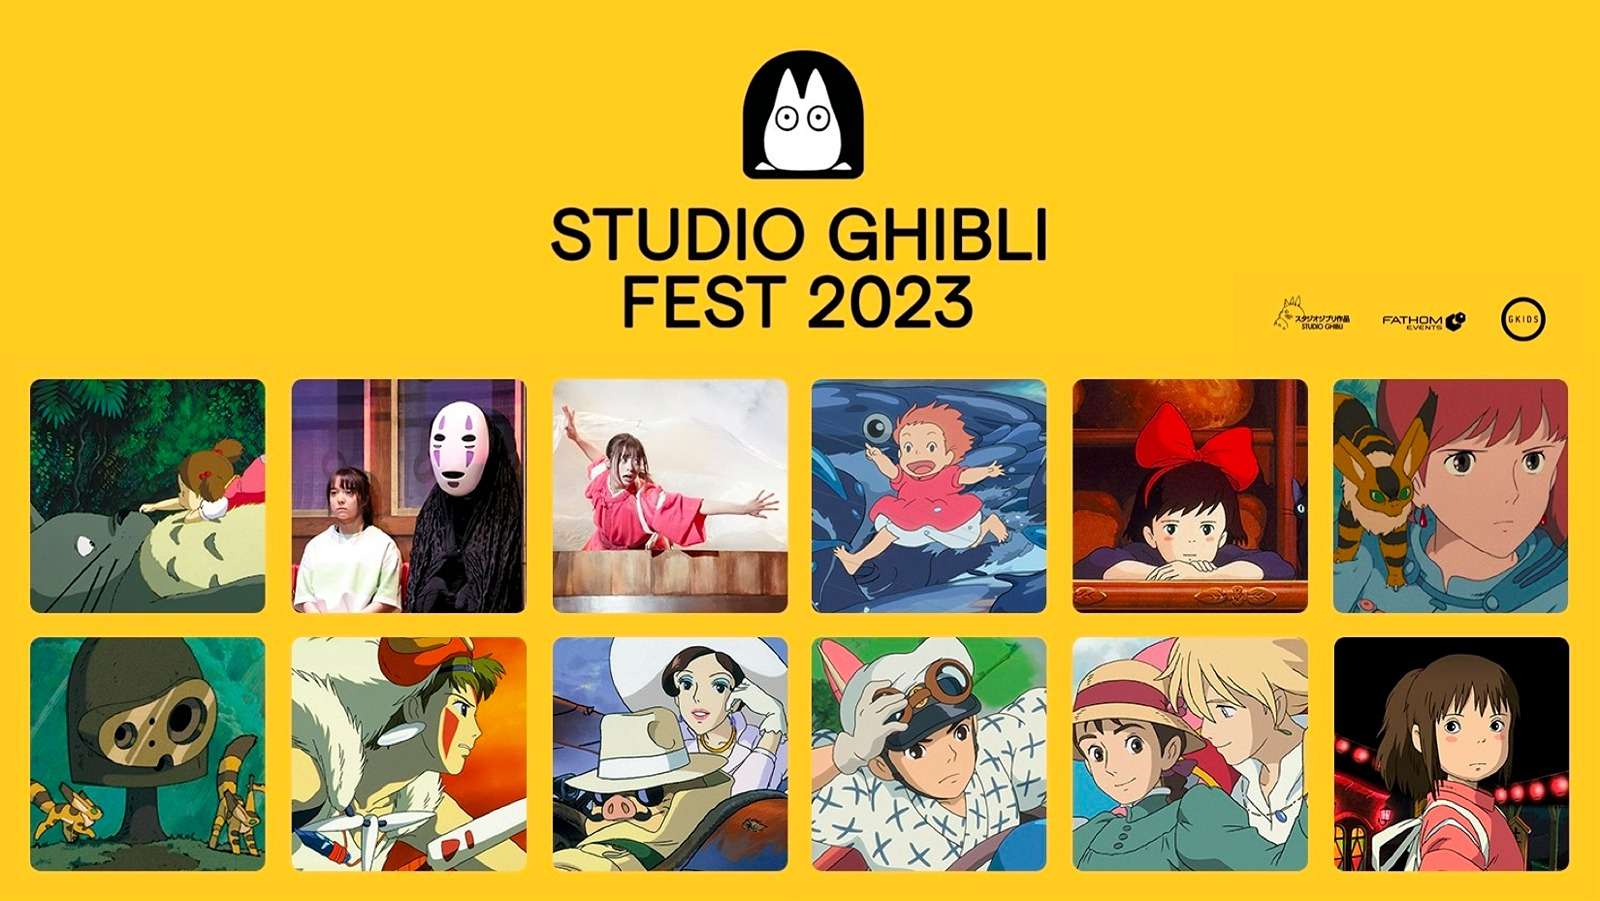 The official poster of Studio Ghibli Fest 2023